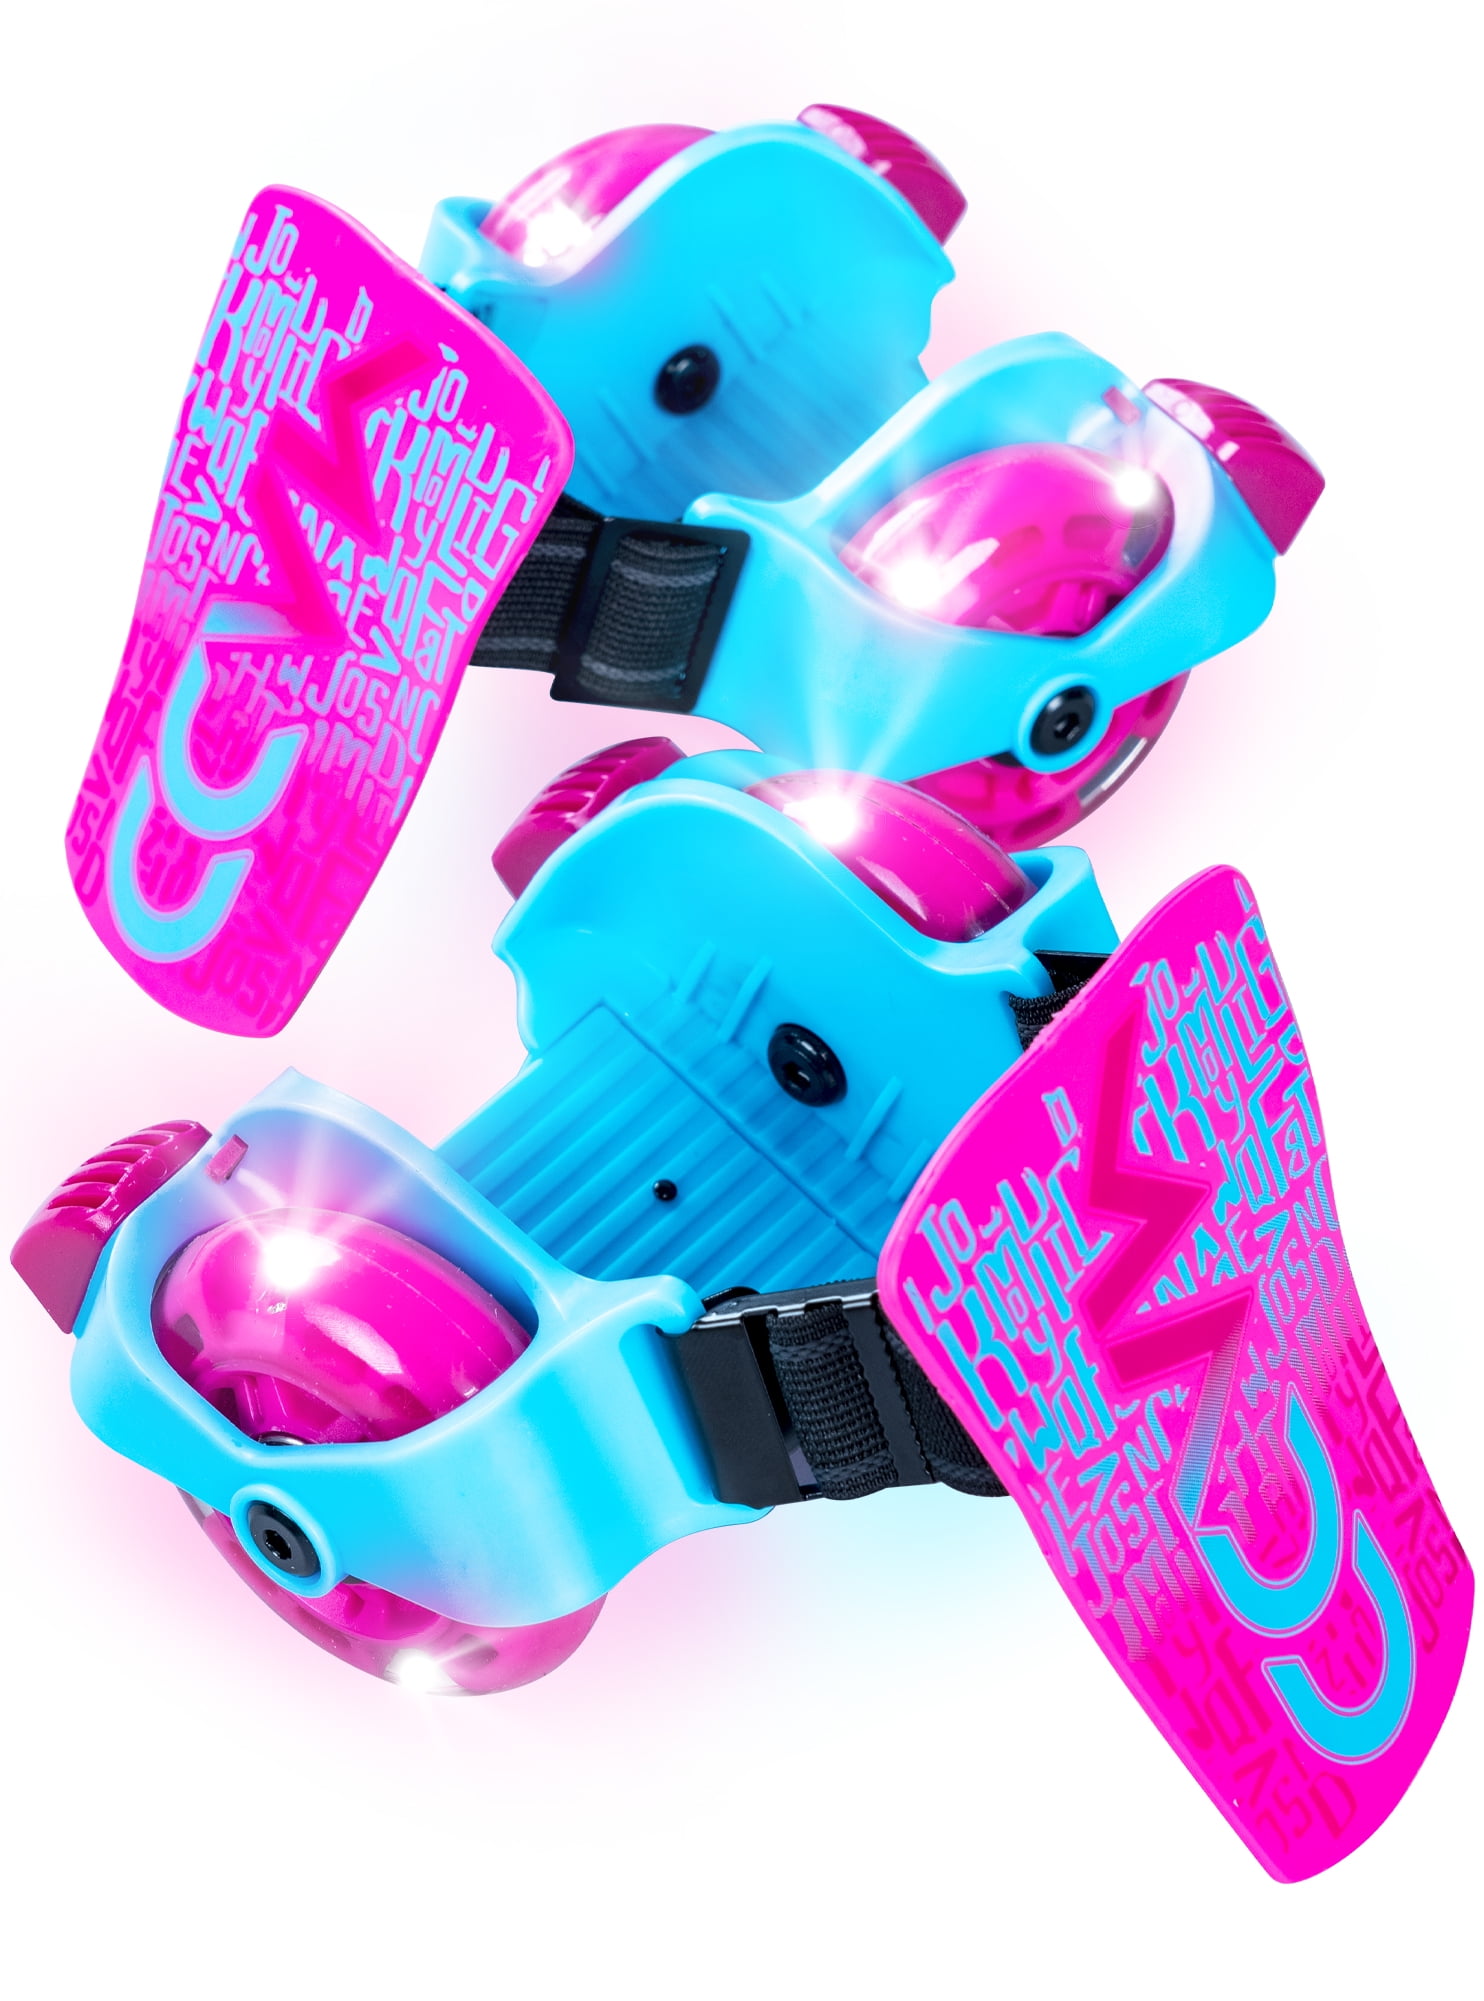 Madd Gear Kids' Light-Up Rollers Adjustable Heel Skates w/ LED Wheels (Pink) $3.73 + Free Shipping w/ Walmart+ or on $35+